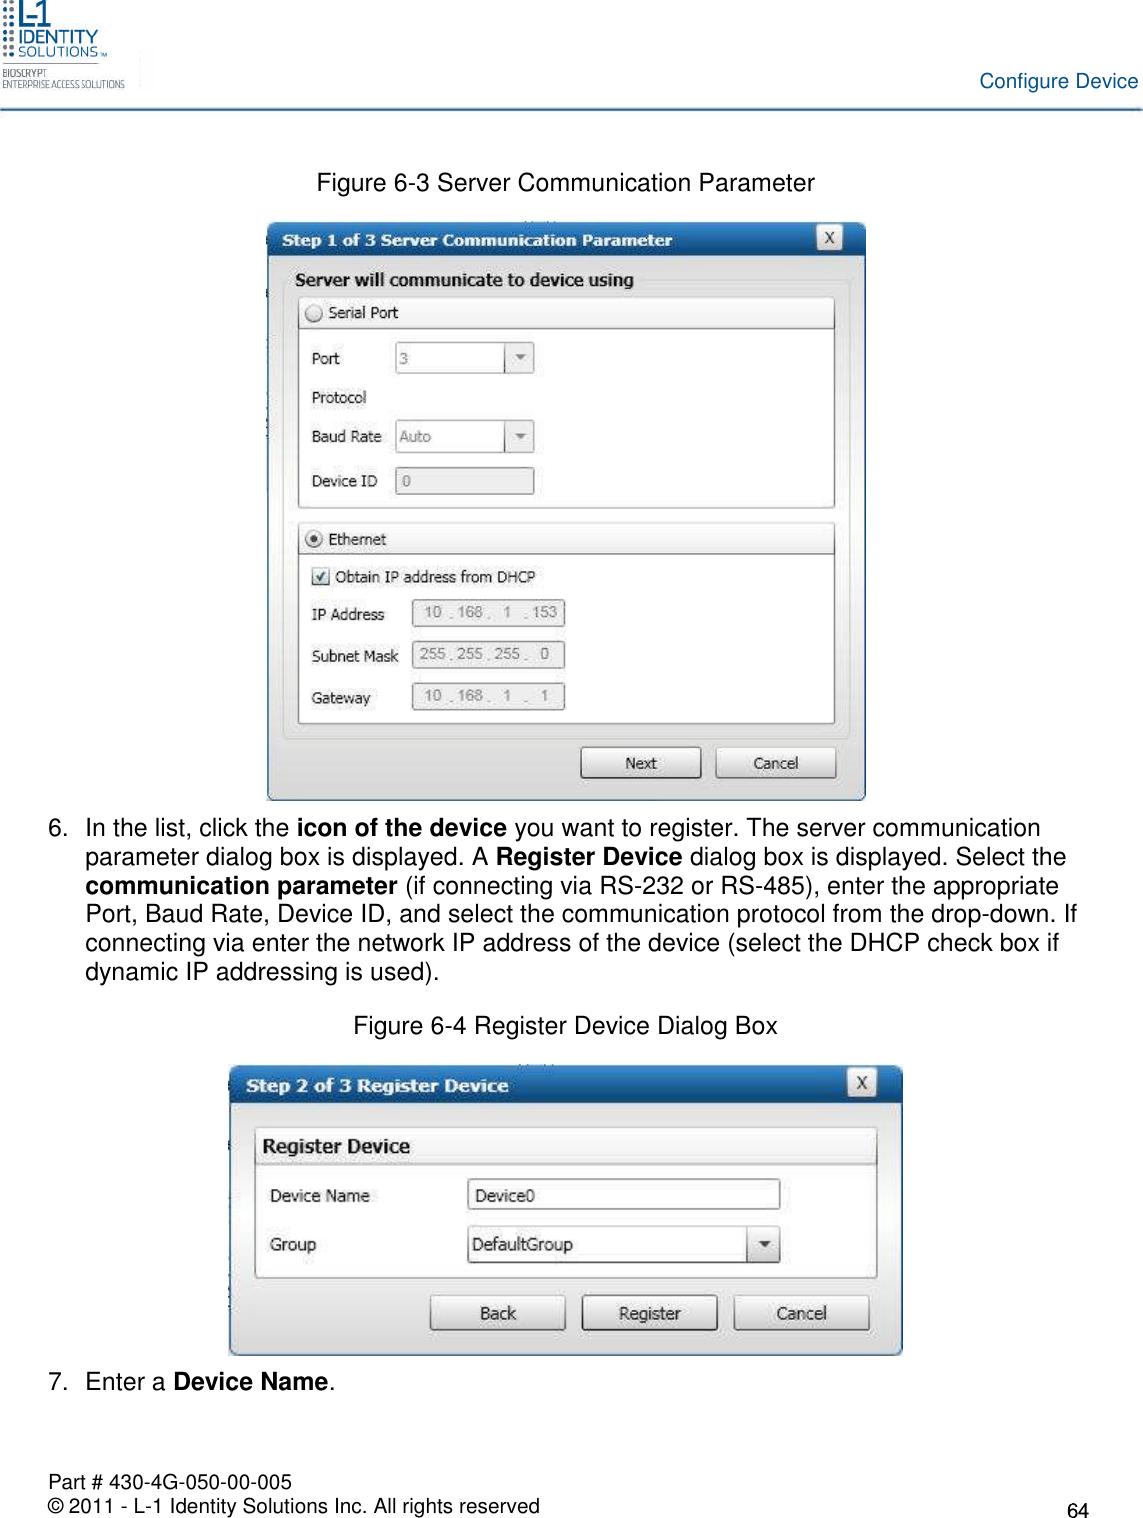 Part # 430-4G-050-00-005© 2011 - L-1 Identity Solutions Inc. All rights reservedConfigure DeviceFigure 6-3 Server Communication Parameter6. In the list, click the icon of the device you want to register. The server communicationparameter dialog box is displayed. A Register Device dialog box is displayed. Select thecommunication parameter (if connecting via RS-232 or RS-485), enter the appropriatePort, Baud Rate, Device ID, and select the communication protocol from the drop-down. Ifconnecting via enter the network IP address of the device (select the DHCP check box ifdynamic IP addressing is used).Figure 6-4 Register Device Dialog Box7. Enter a Device Name.